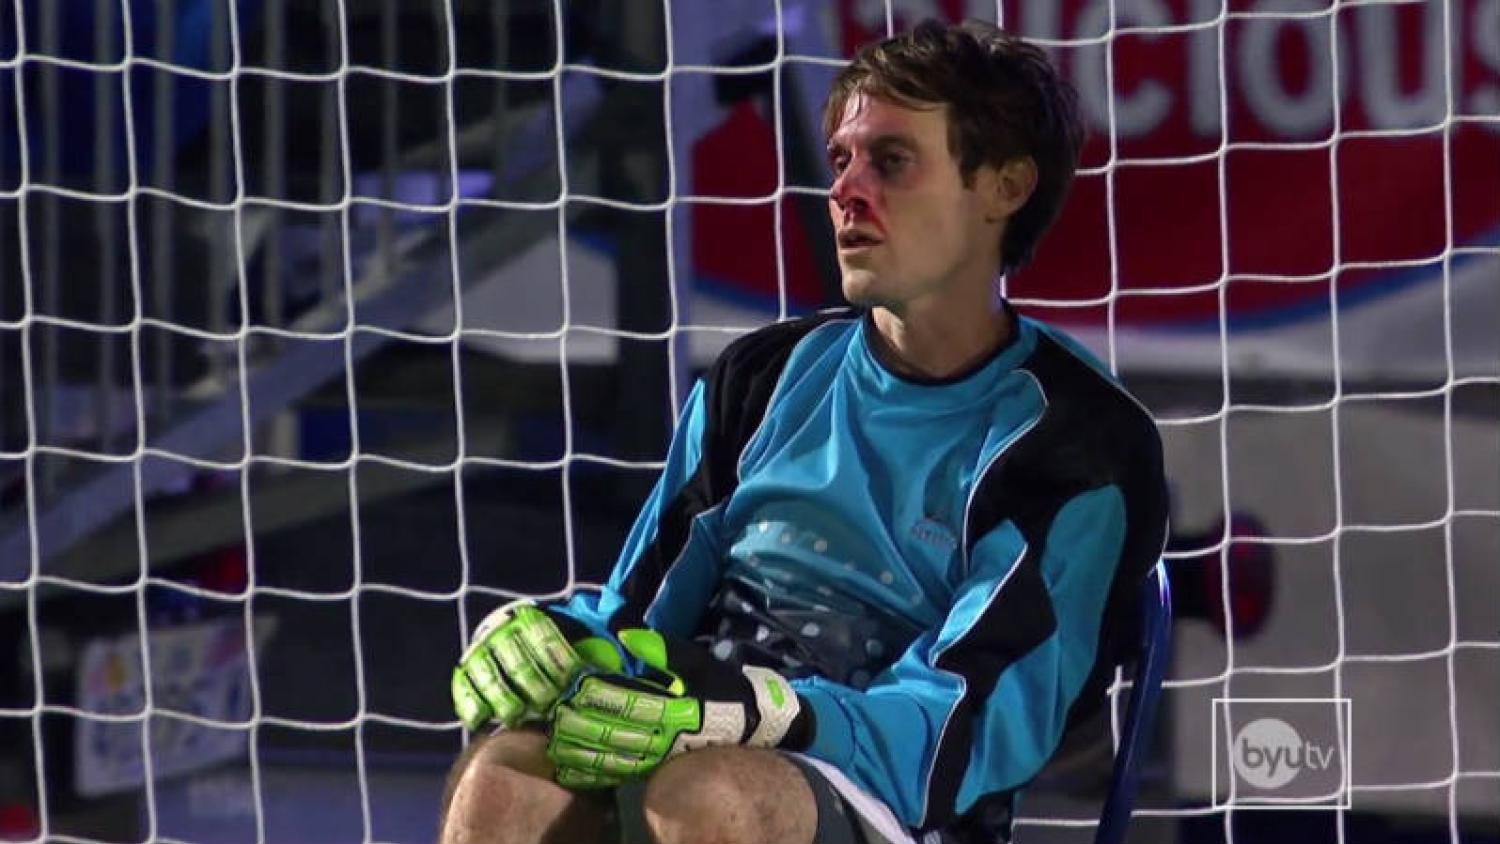 Studio C Funny Hilarious Parody Scott Sterling Keeper Penalty Save Face Concussion Laughing Miracle ?itok=dQGJ7IMK